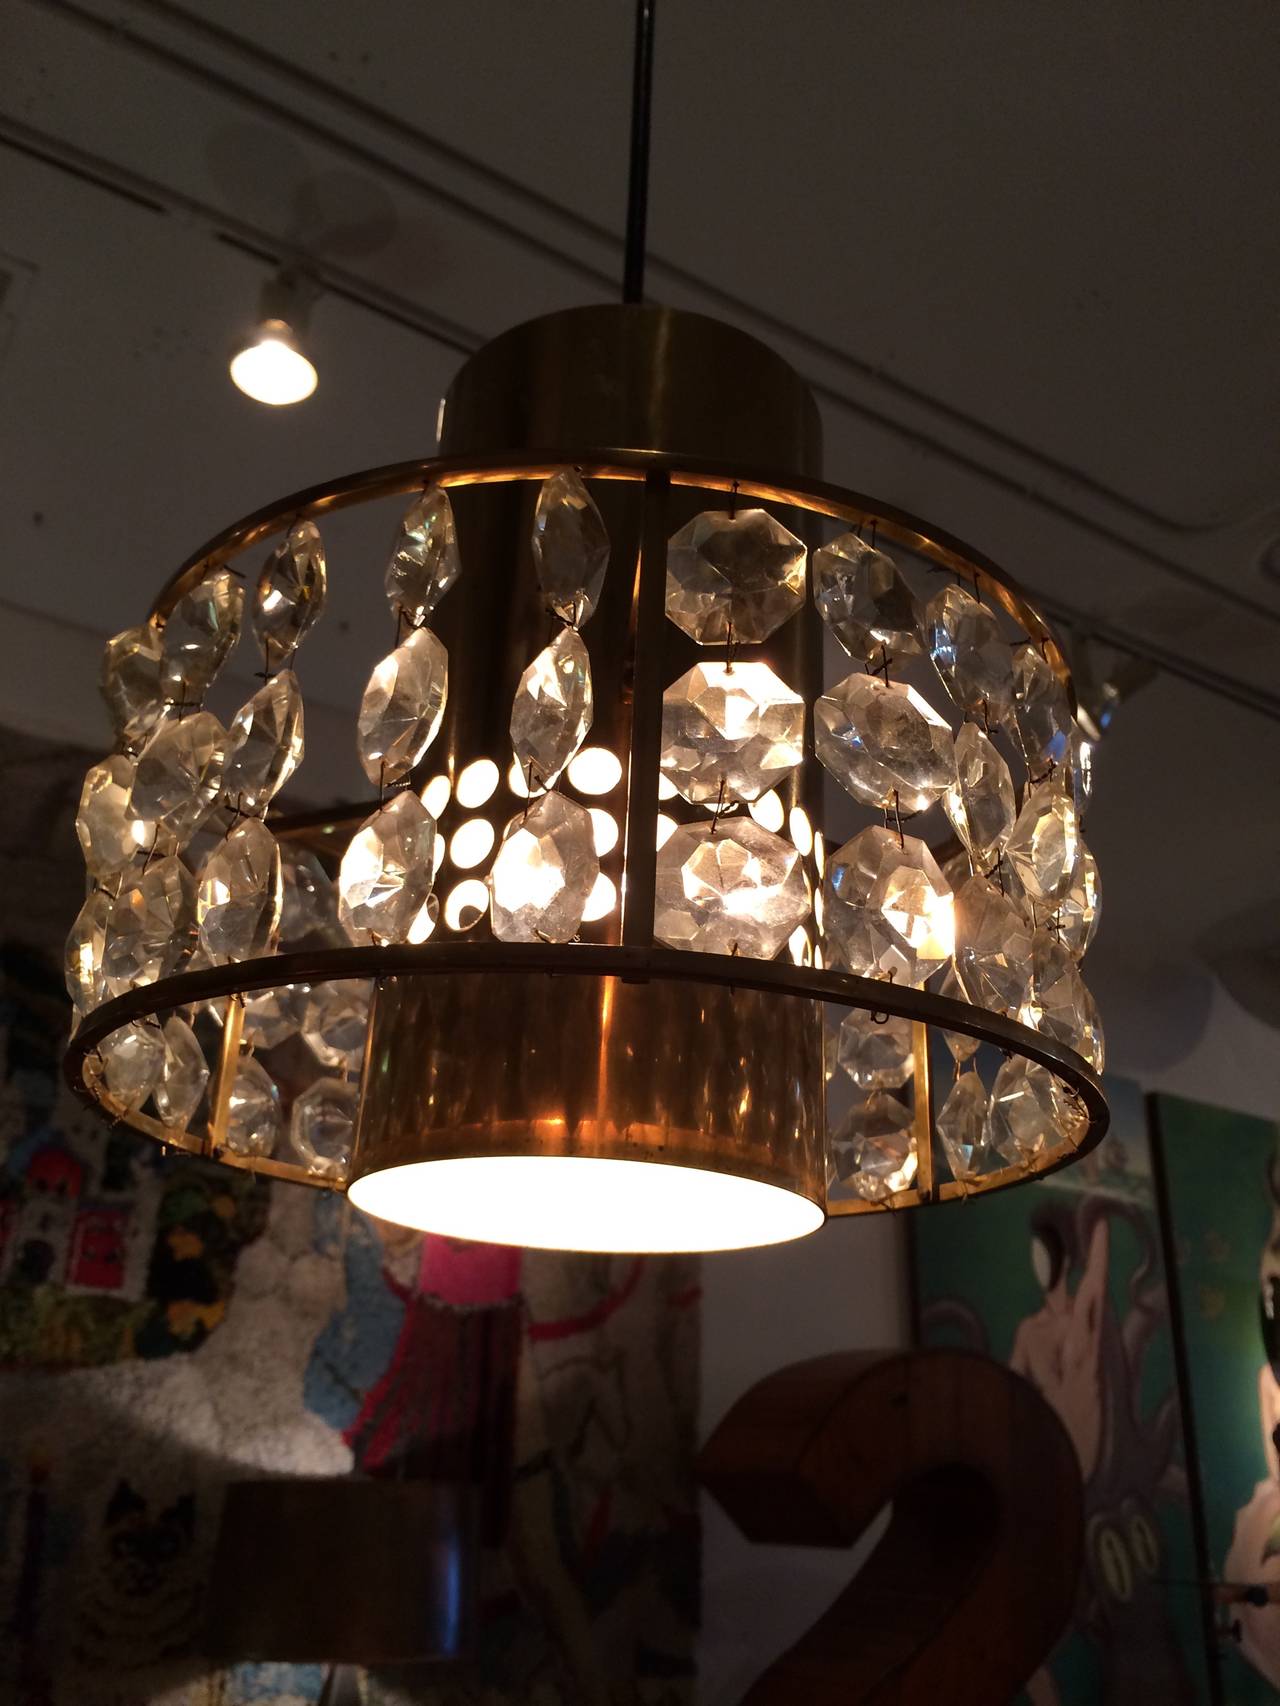 Bands of crystal bobbles surround a perforated brass housing on these super chic 1960s French pendants. These have been professionally restored and wired to US UL lighting standards. New custom brass canapés allow for easy installation.